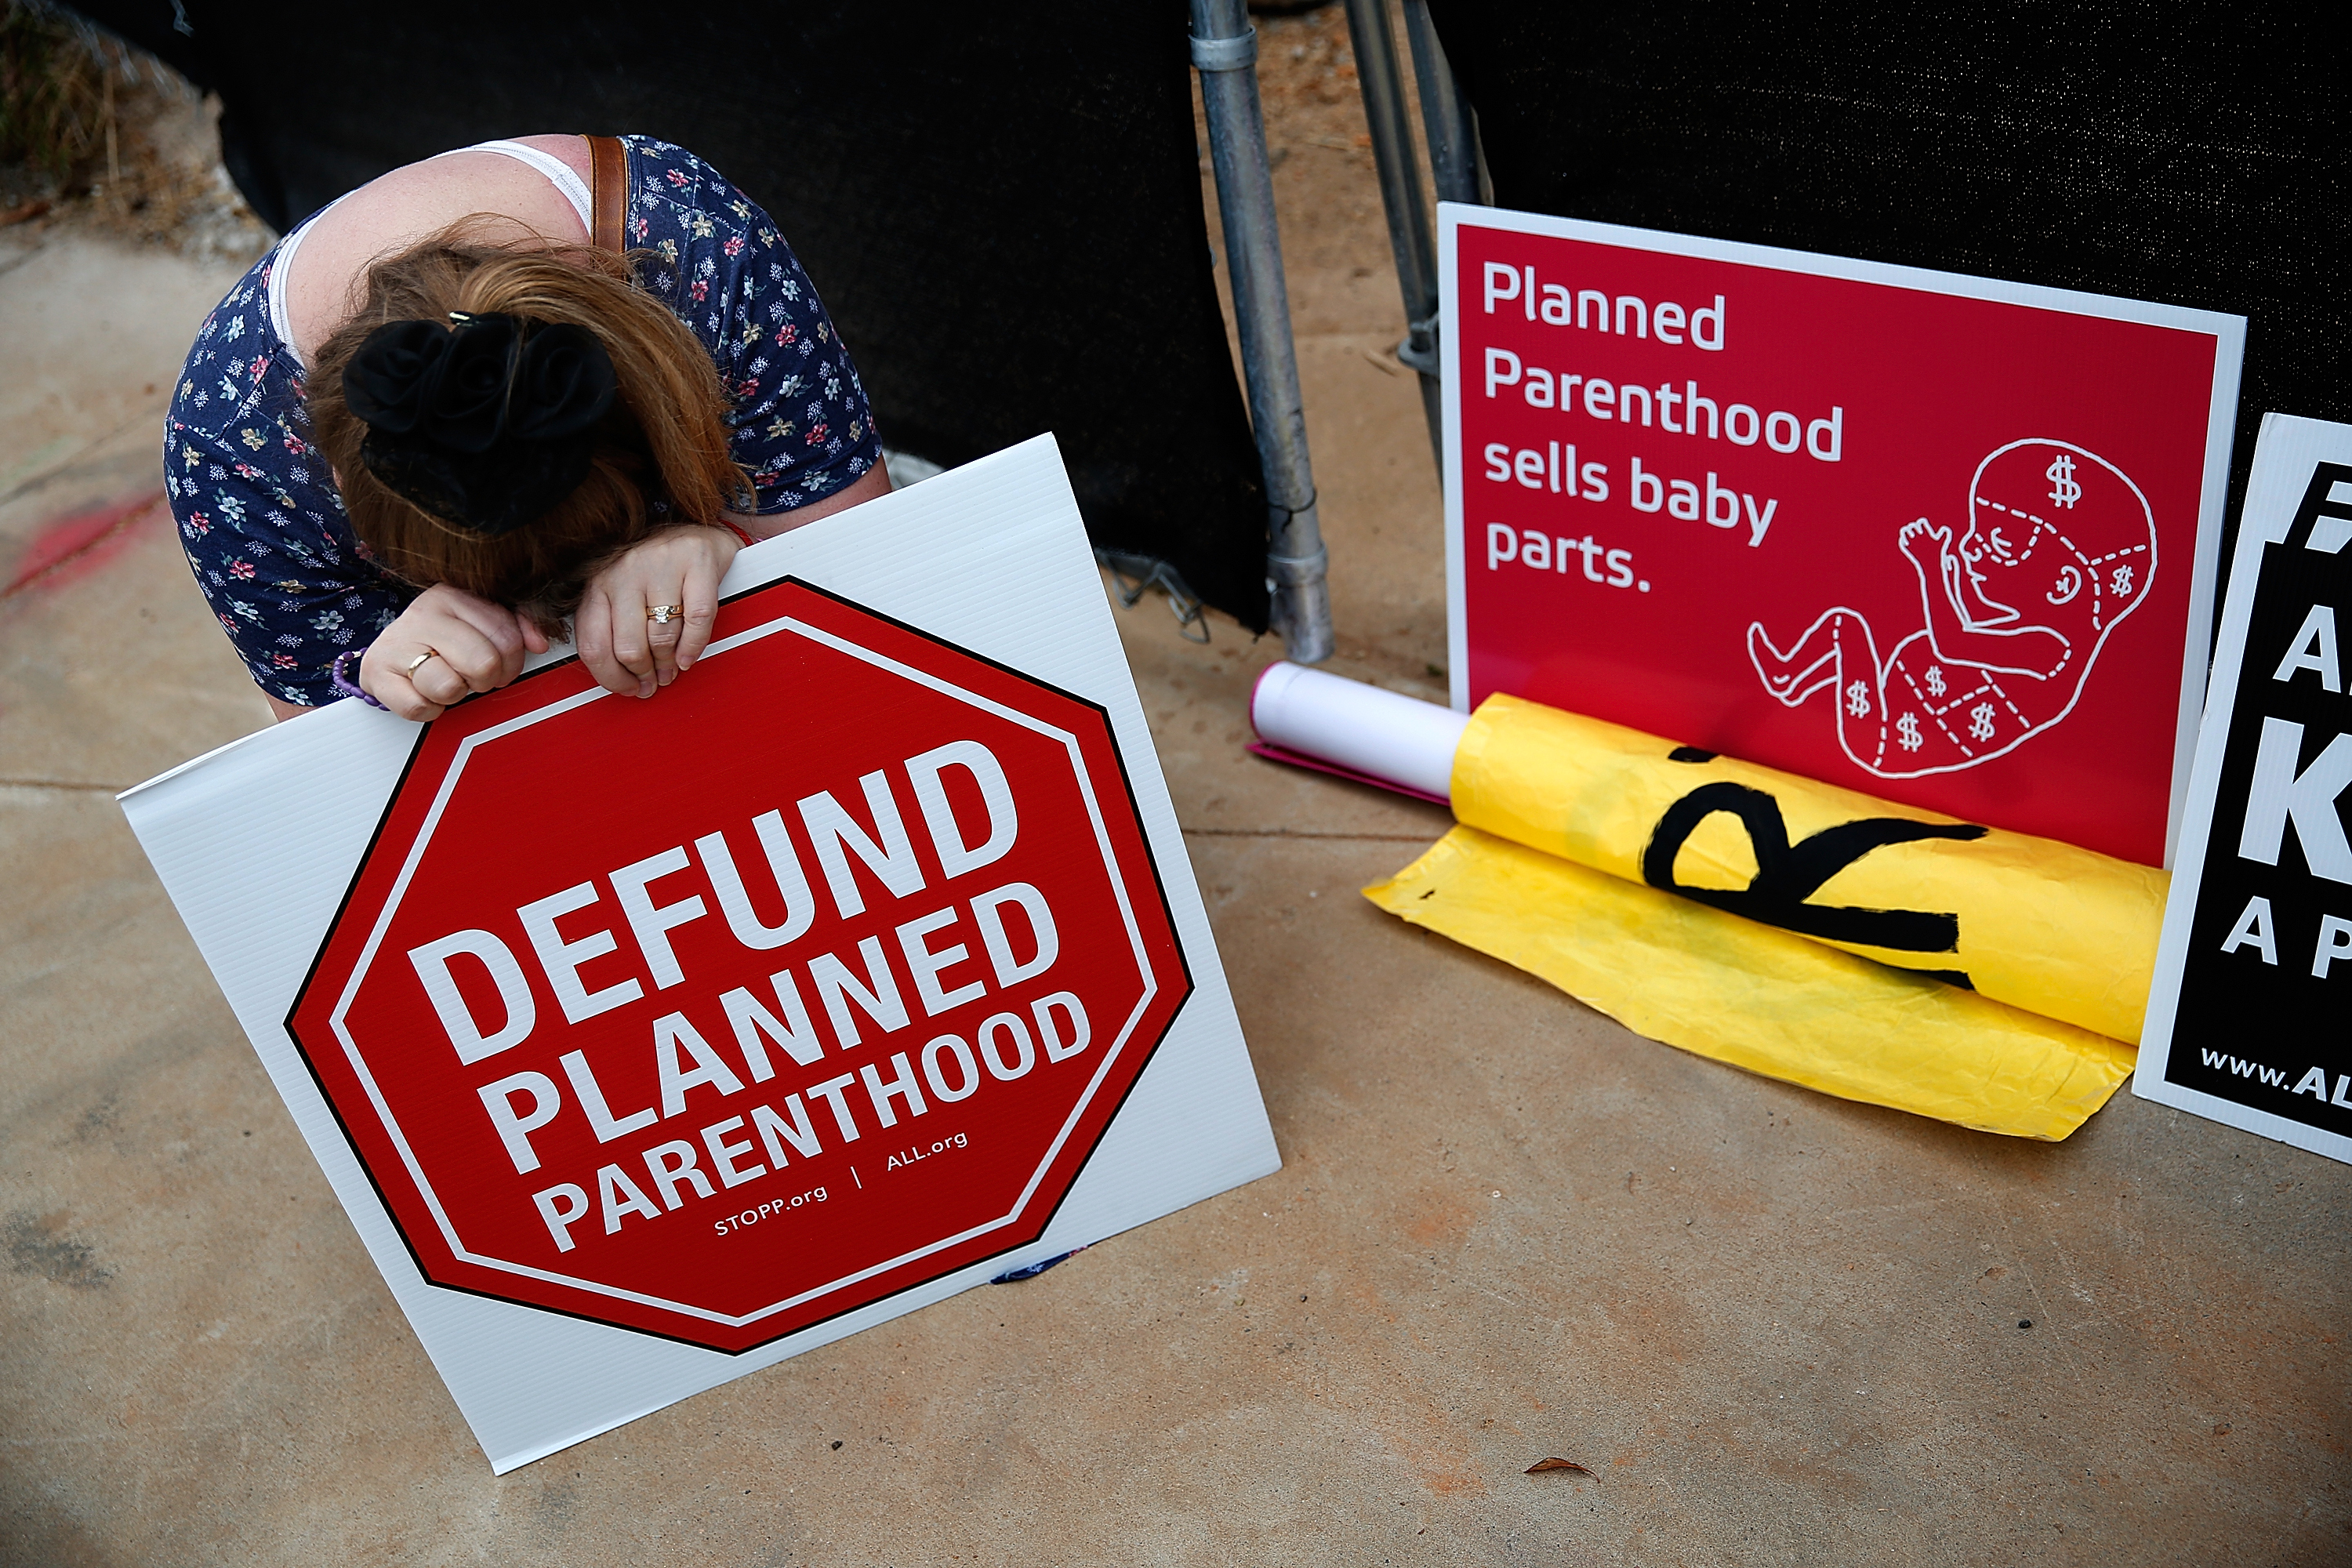 Right to Life advocate Linda Heilman prays during a sit-in in front of a proposed Planned Parenthood location while demonstrating the group's opposition to congressional funding of Planned Parenthood in Washington, DC, on Sept. 21, 2015.